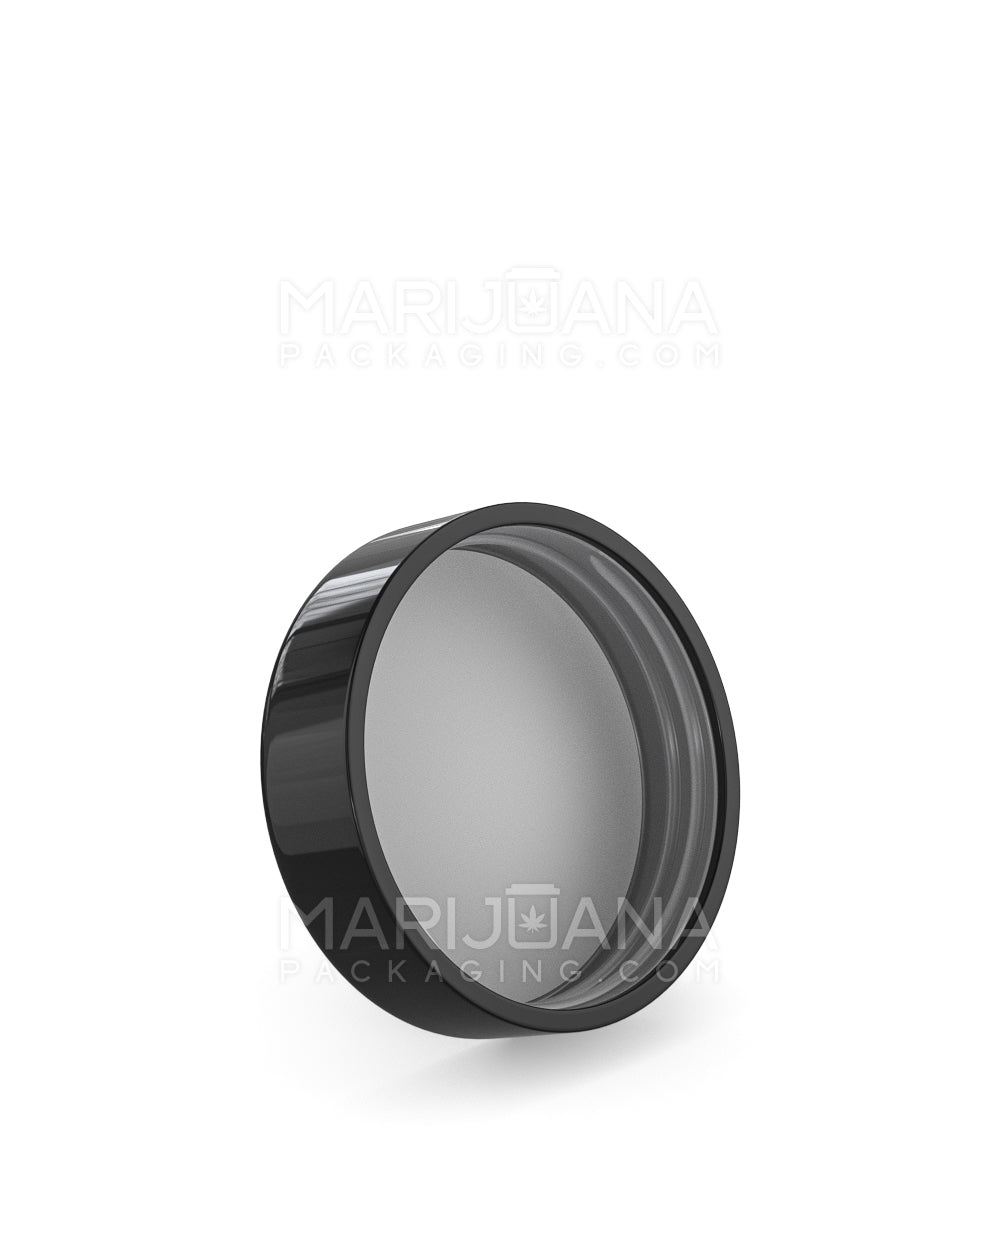 Child Resistant | Smooth Push Down & Turn Plastic Caps w/ Foam Liner | 50mm - Glossy Black - 100 Count